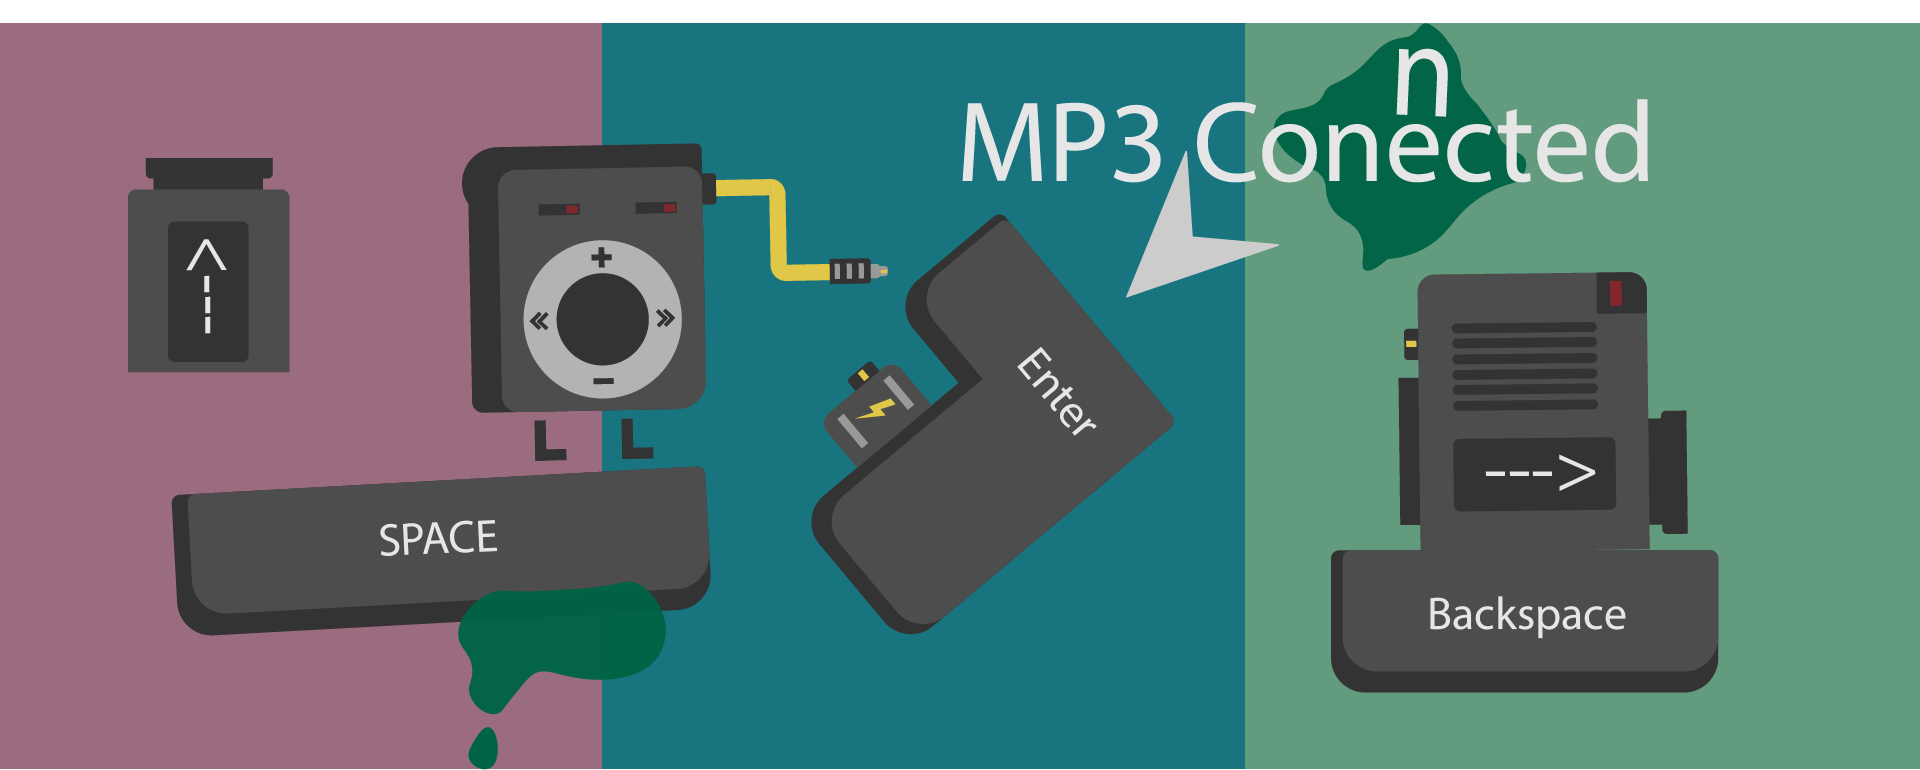 MP3 Connected